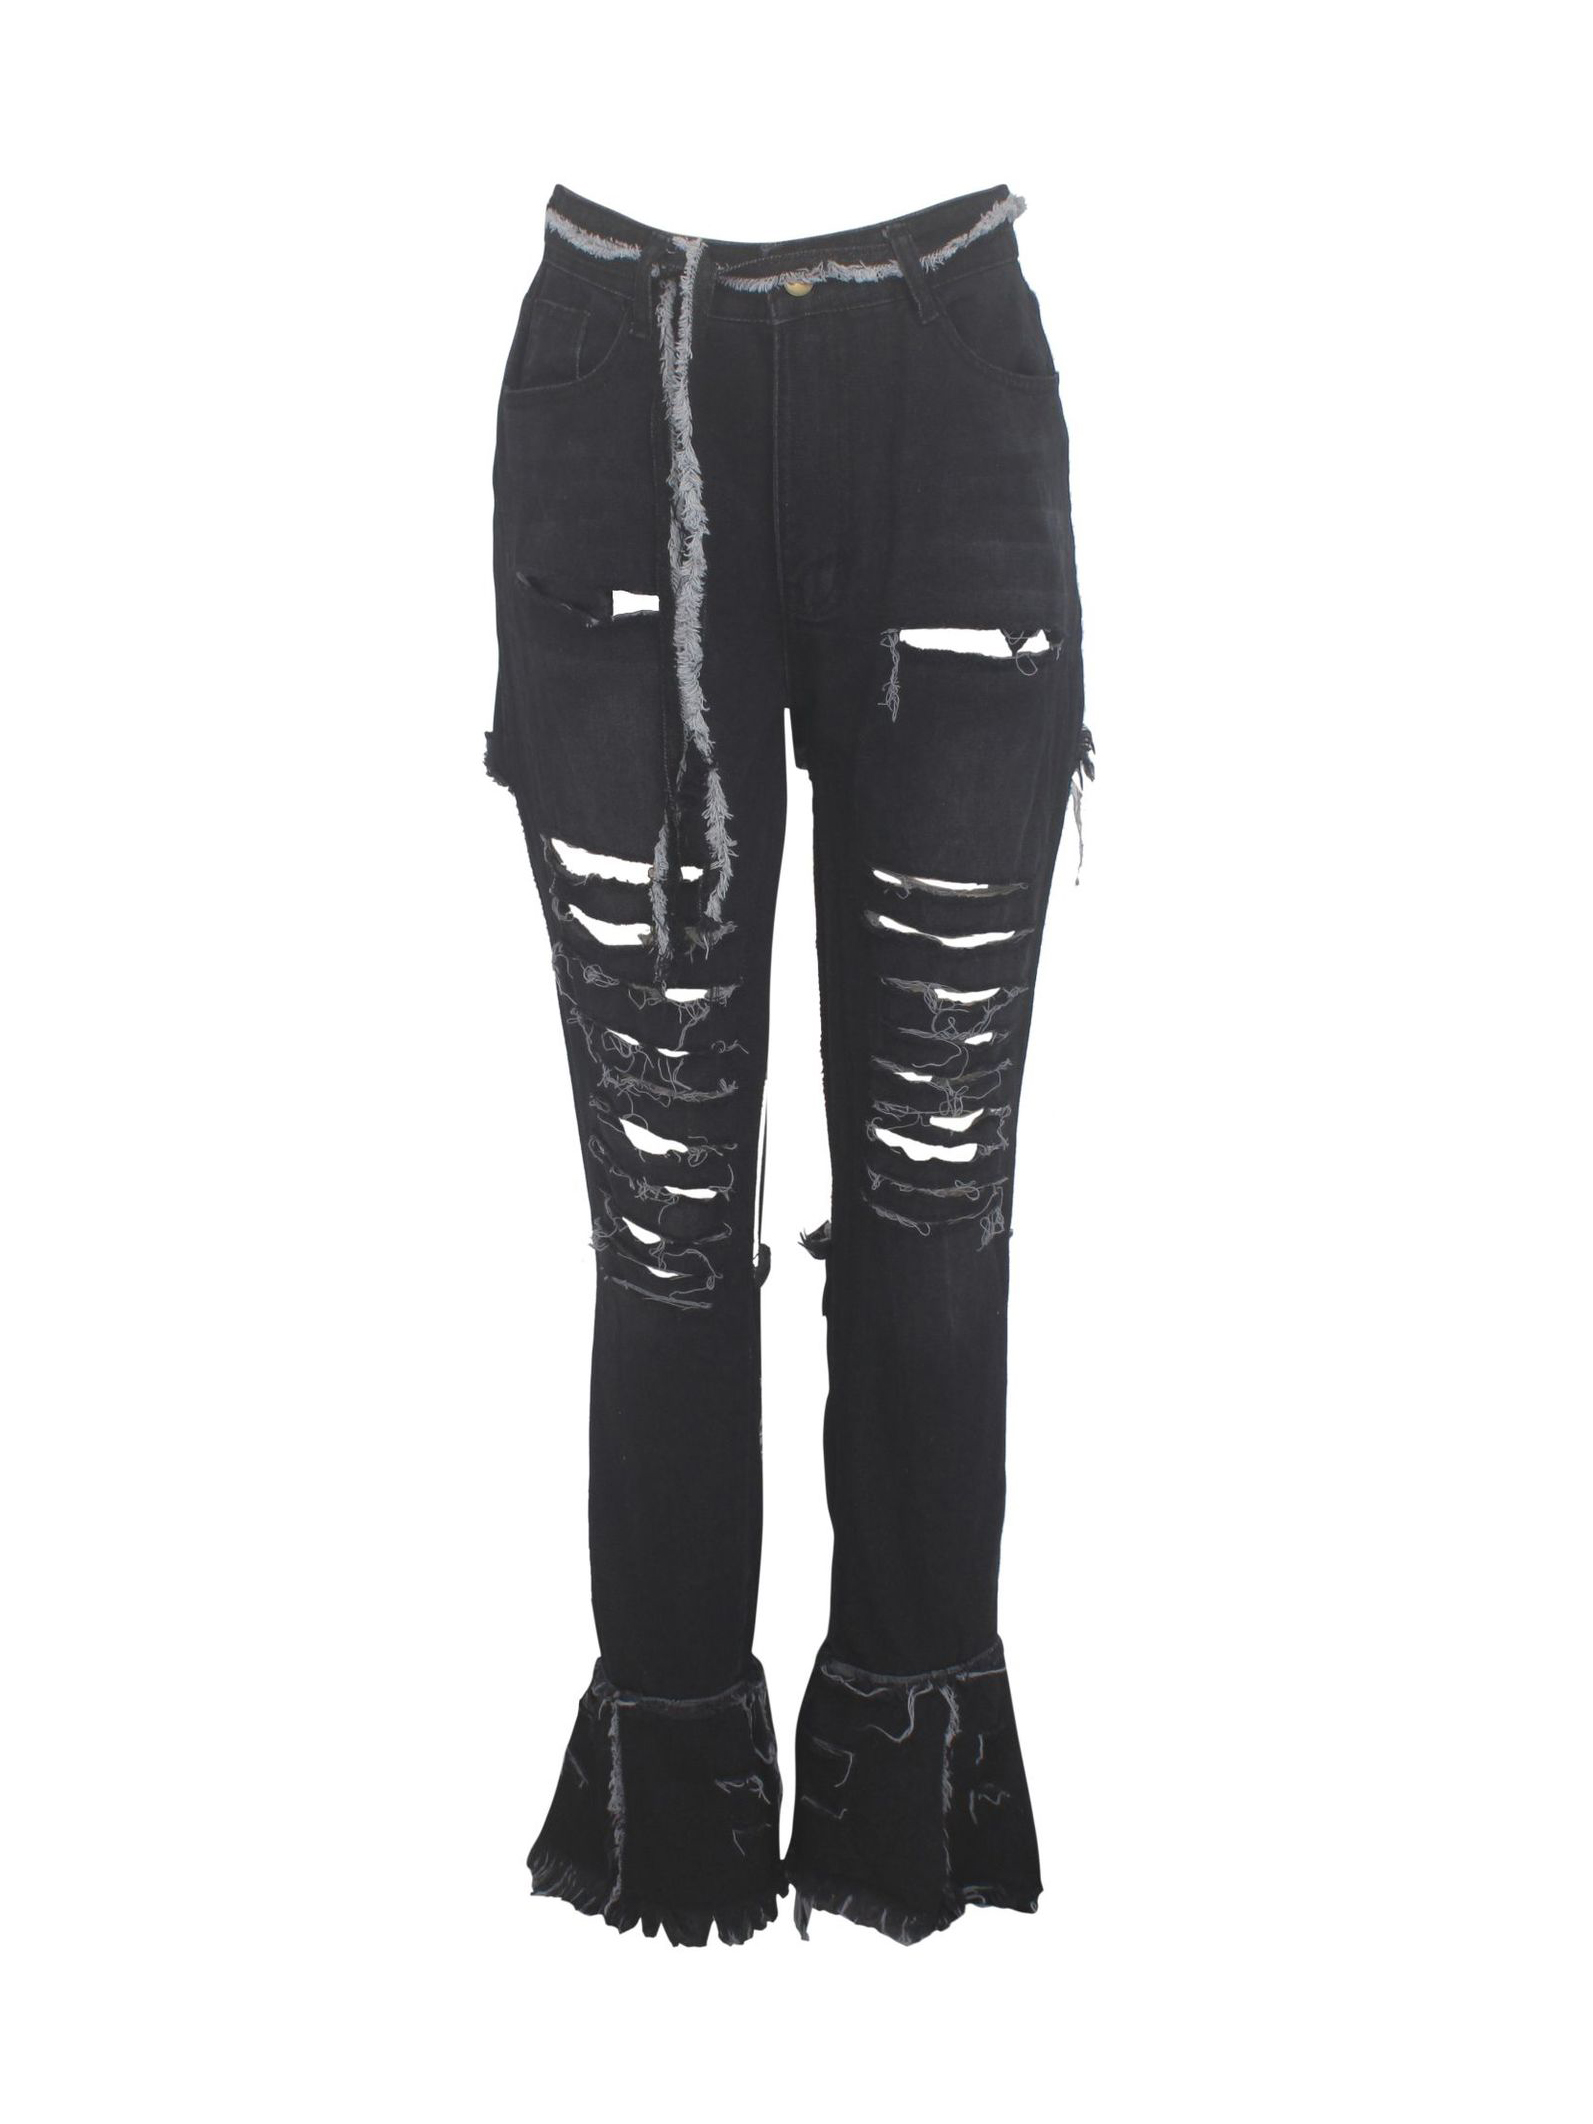 Attractive High Waist Black Ripped Jeans